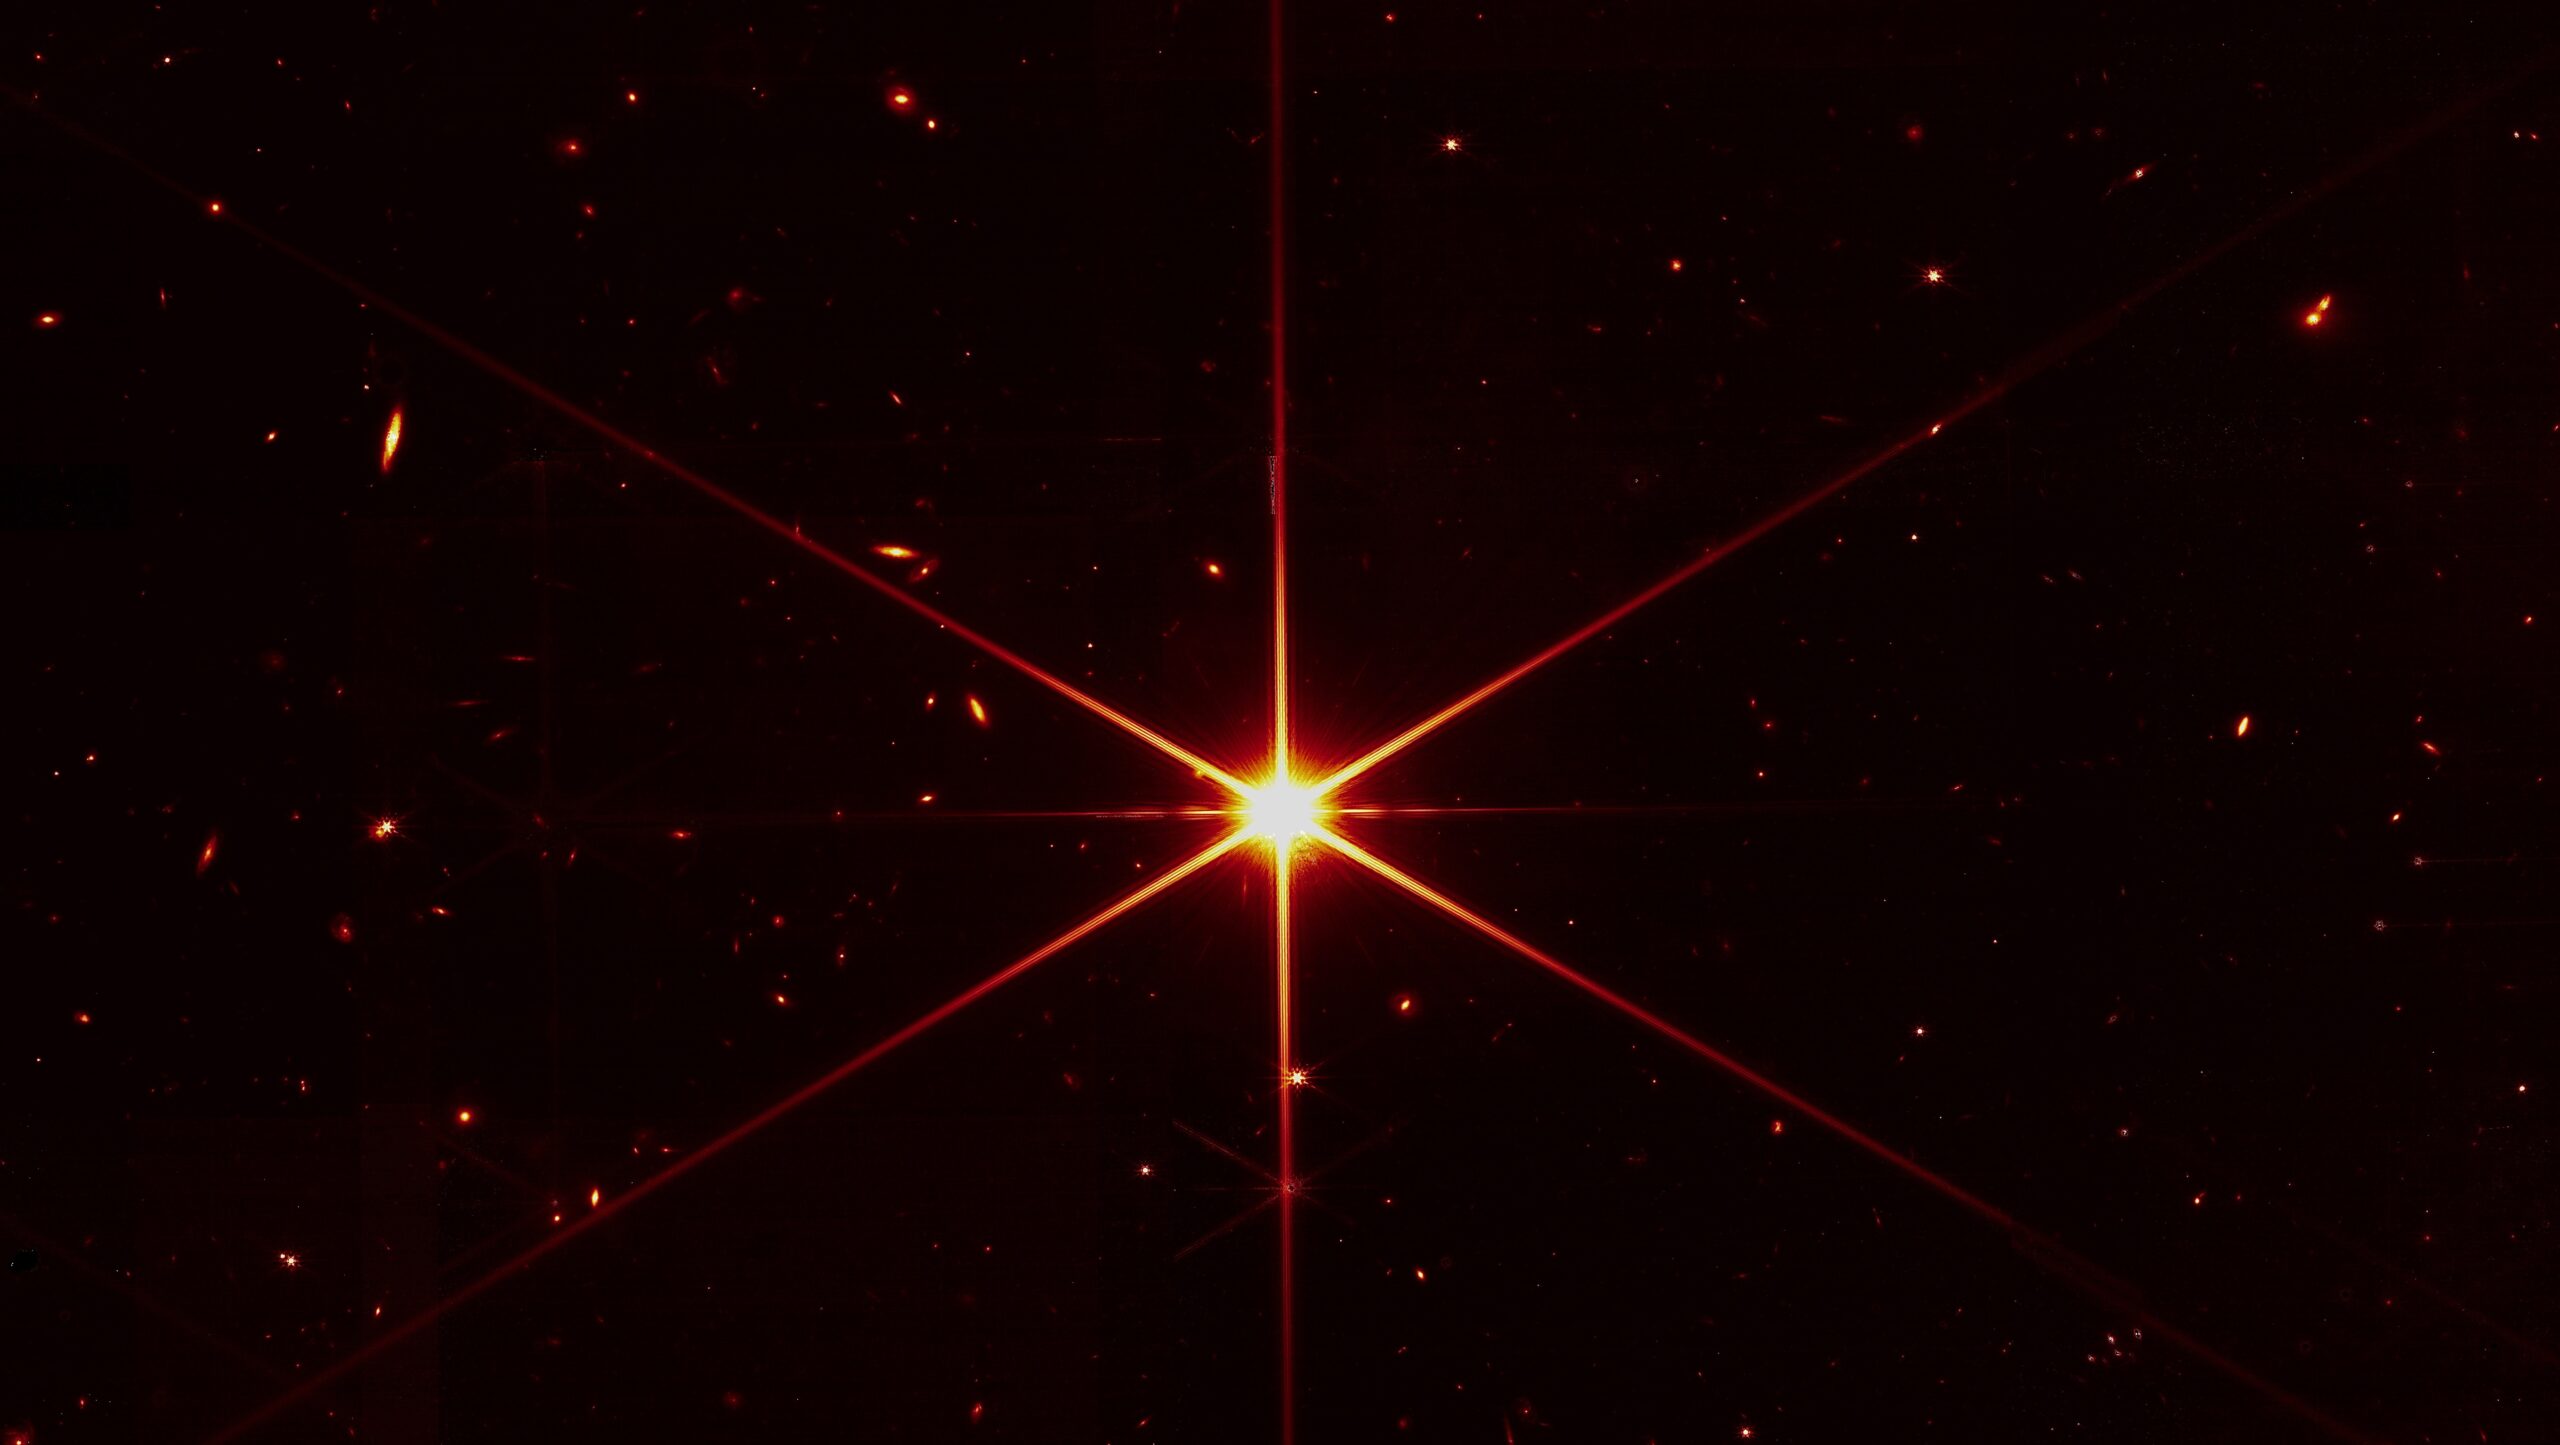 A fully aligned James Webb Space Telescope captures a glorious image of a star